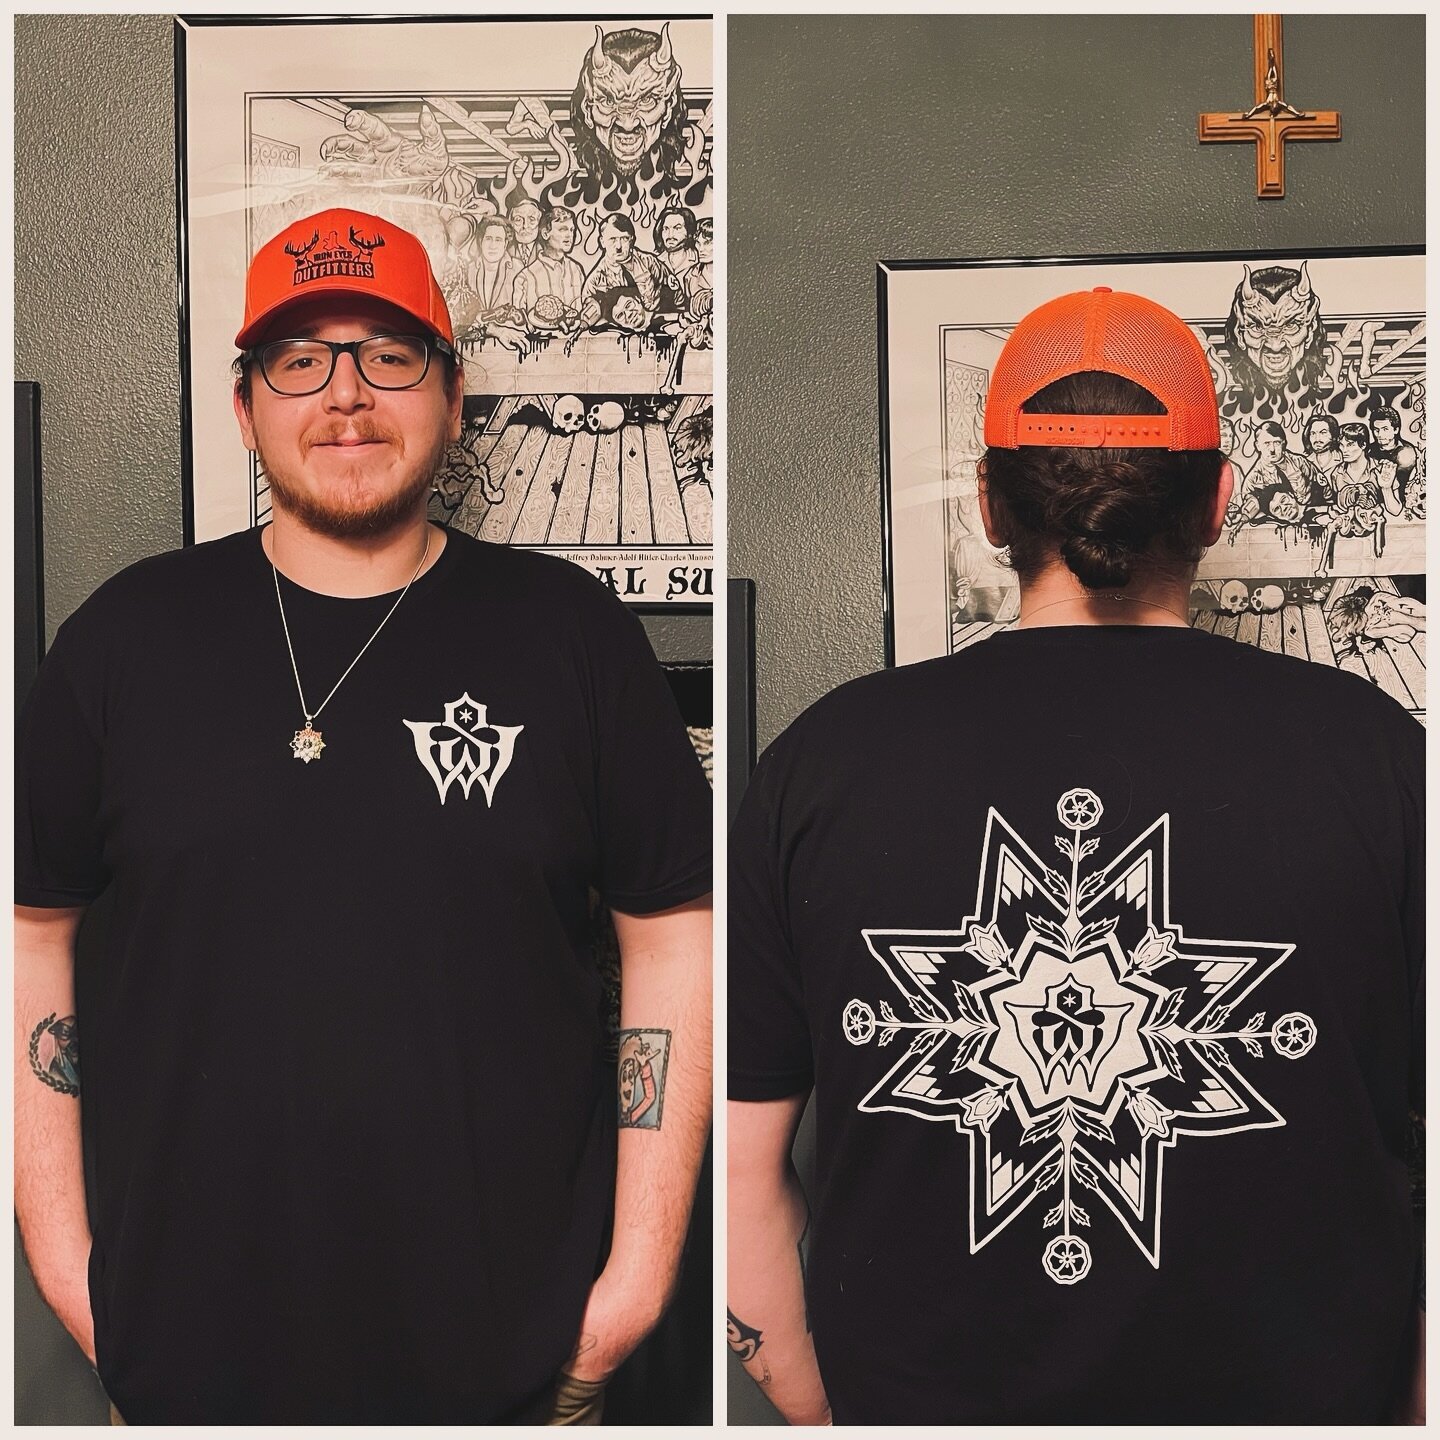 Yoooo I got Tees on deck
Whether you got a small back or big back I got you 
S-4XL
$25 + $8 for shipping
Pictured is my baby daddy, who&rsquo;s definitely in the Illuminati, @newreignmusic wearing a 2XL
Hollerrrr